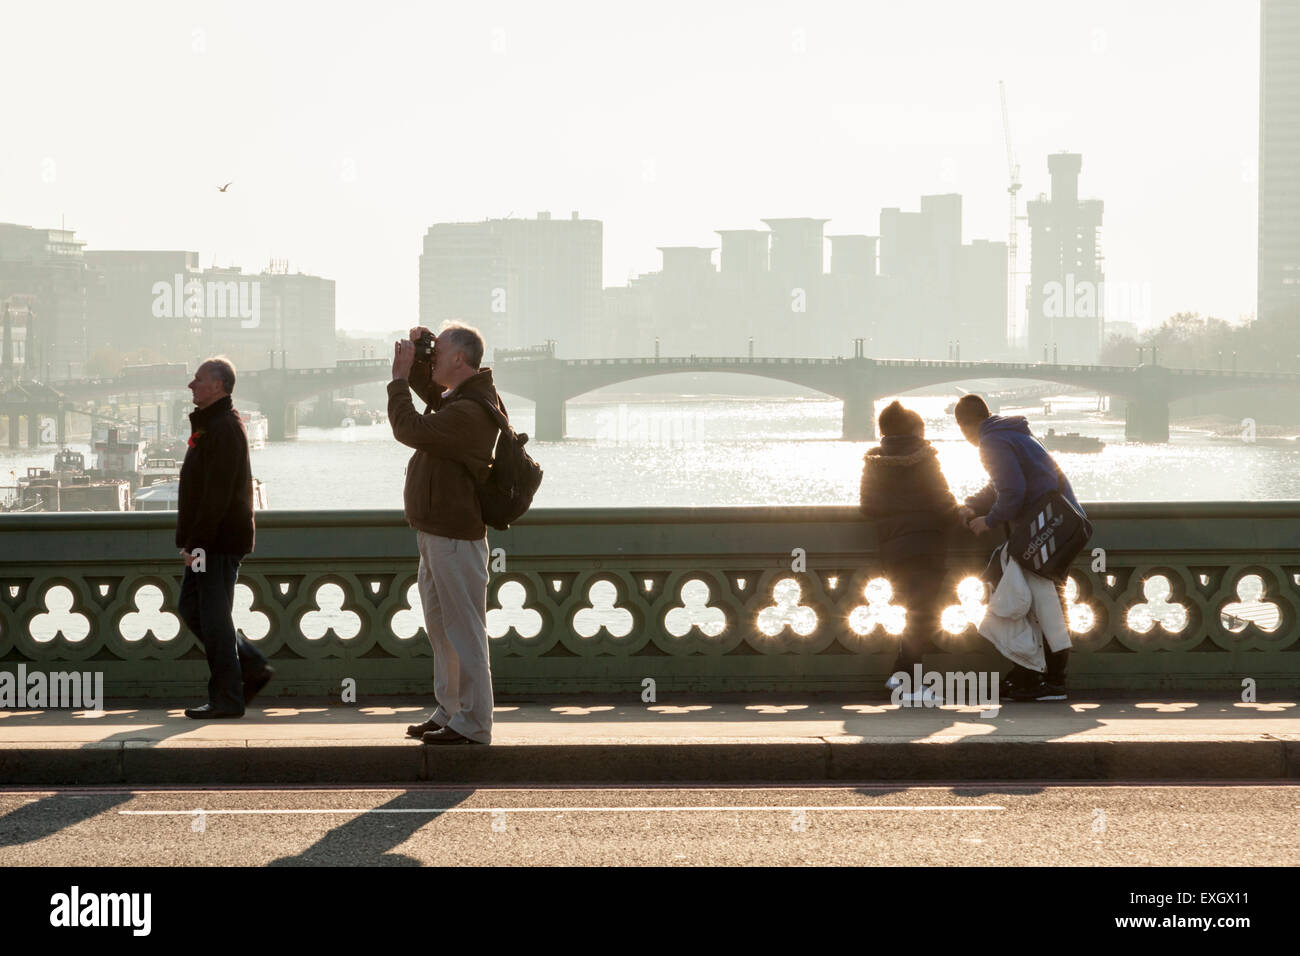 A person photographing, people looking at the river, and a man walking in winter sunlight, River Thames, Westminster Bridge, London, England, UK Stock Photo